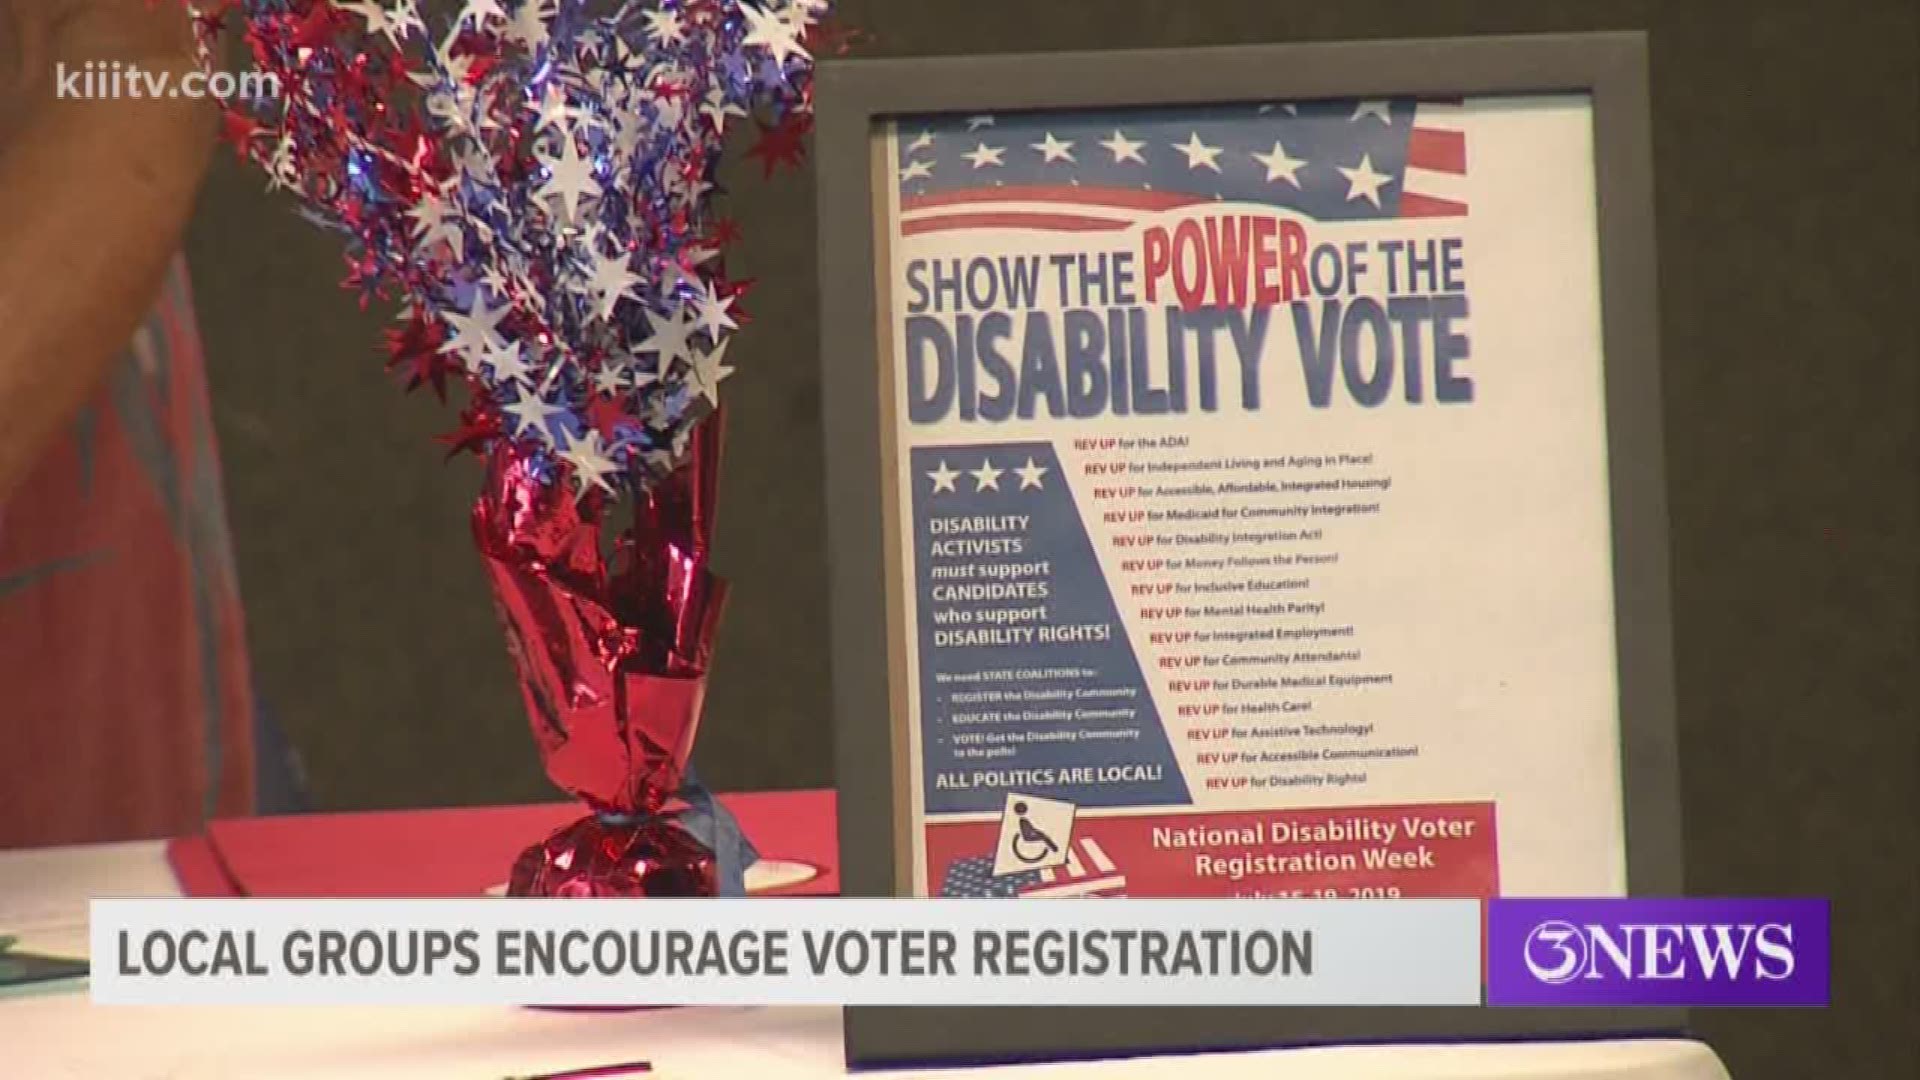 In the wake of National Disability Voter Registration Week, some Coastal Bend organizations are doing their part to ensure people with disabilities are registered to vote.